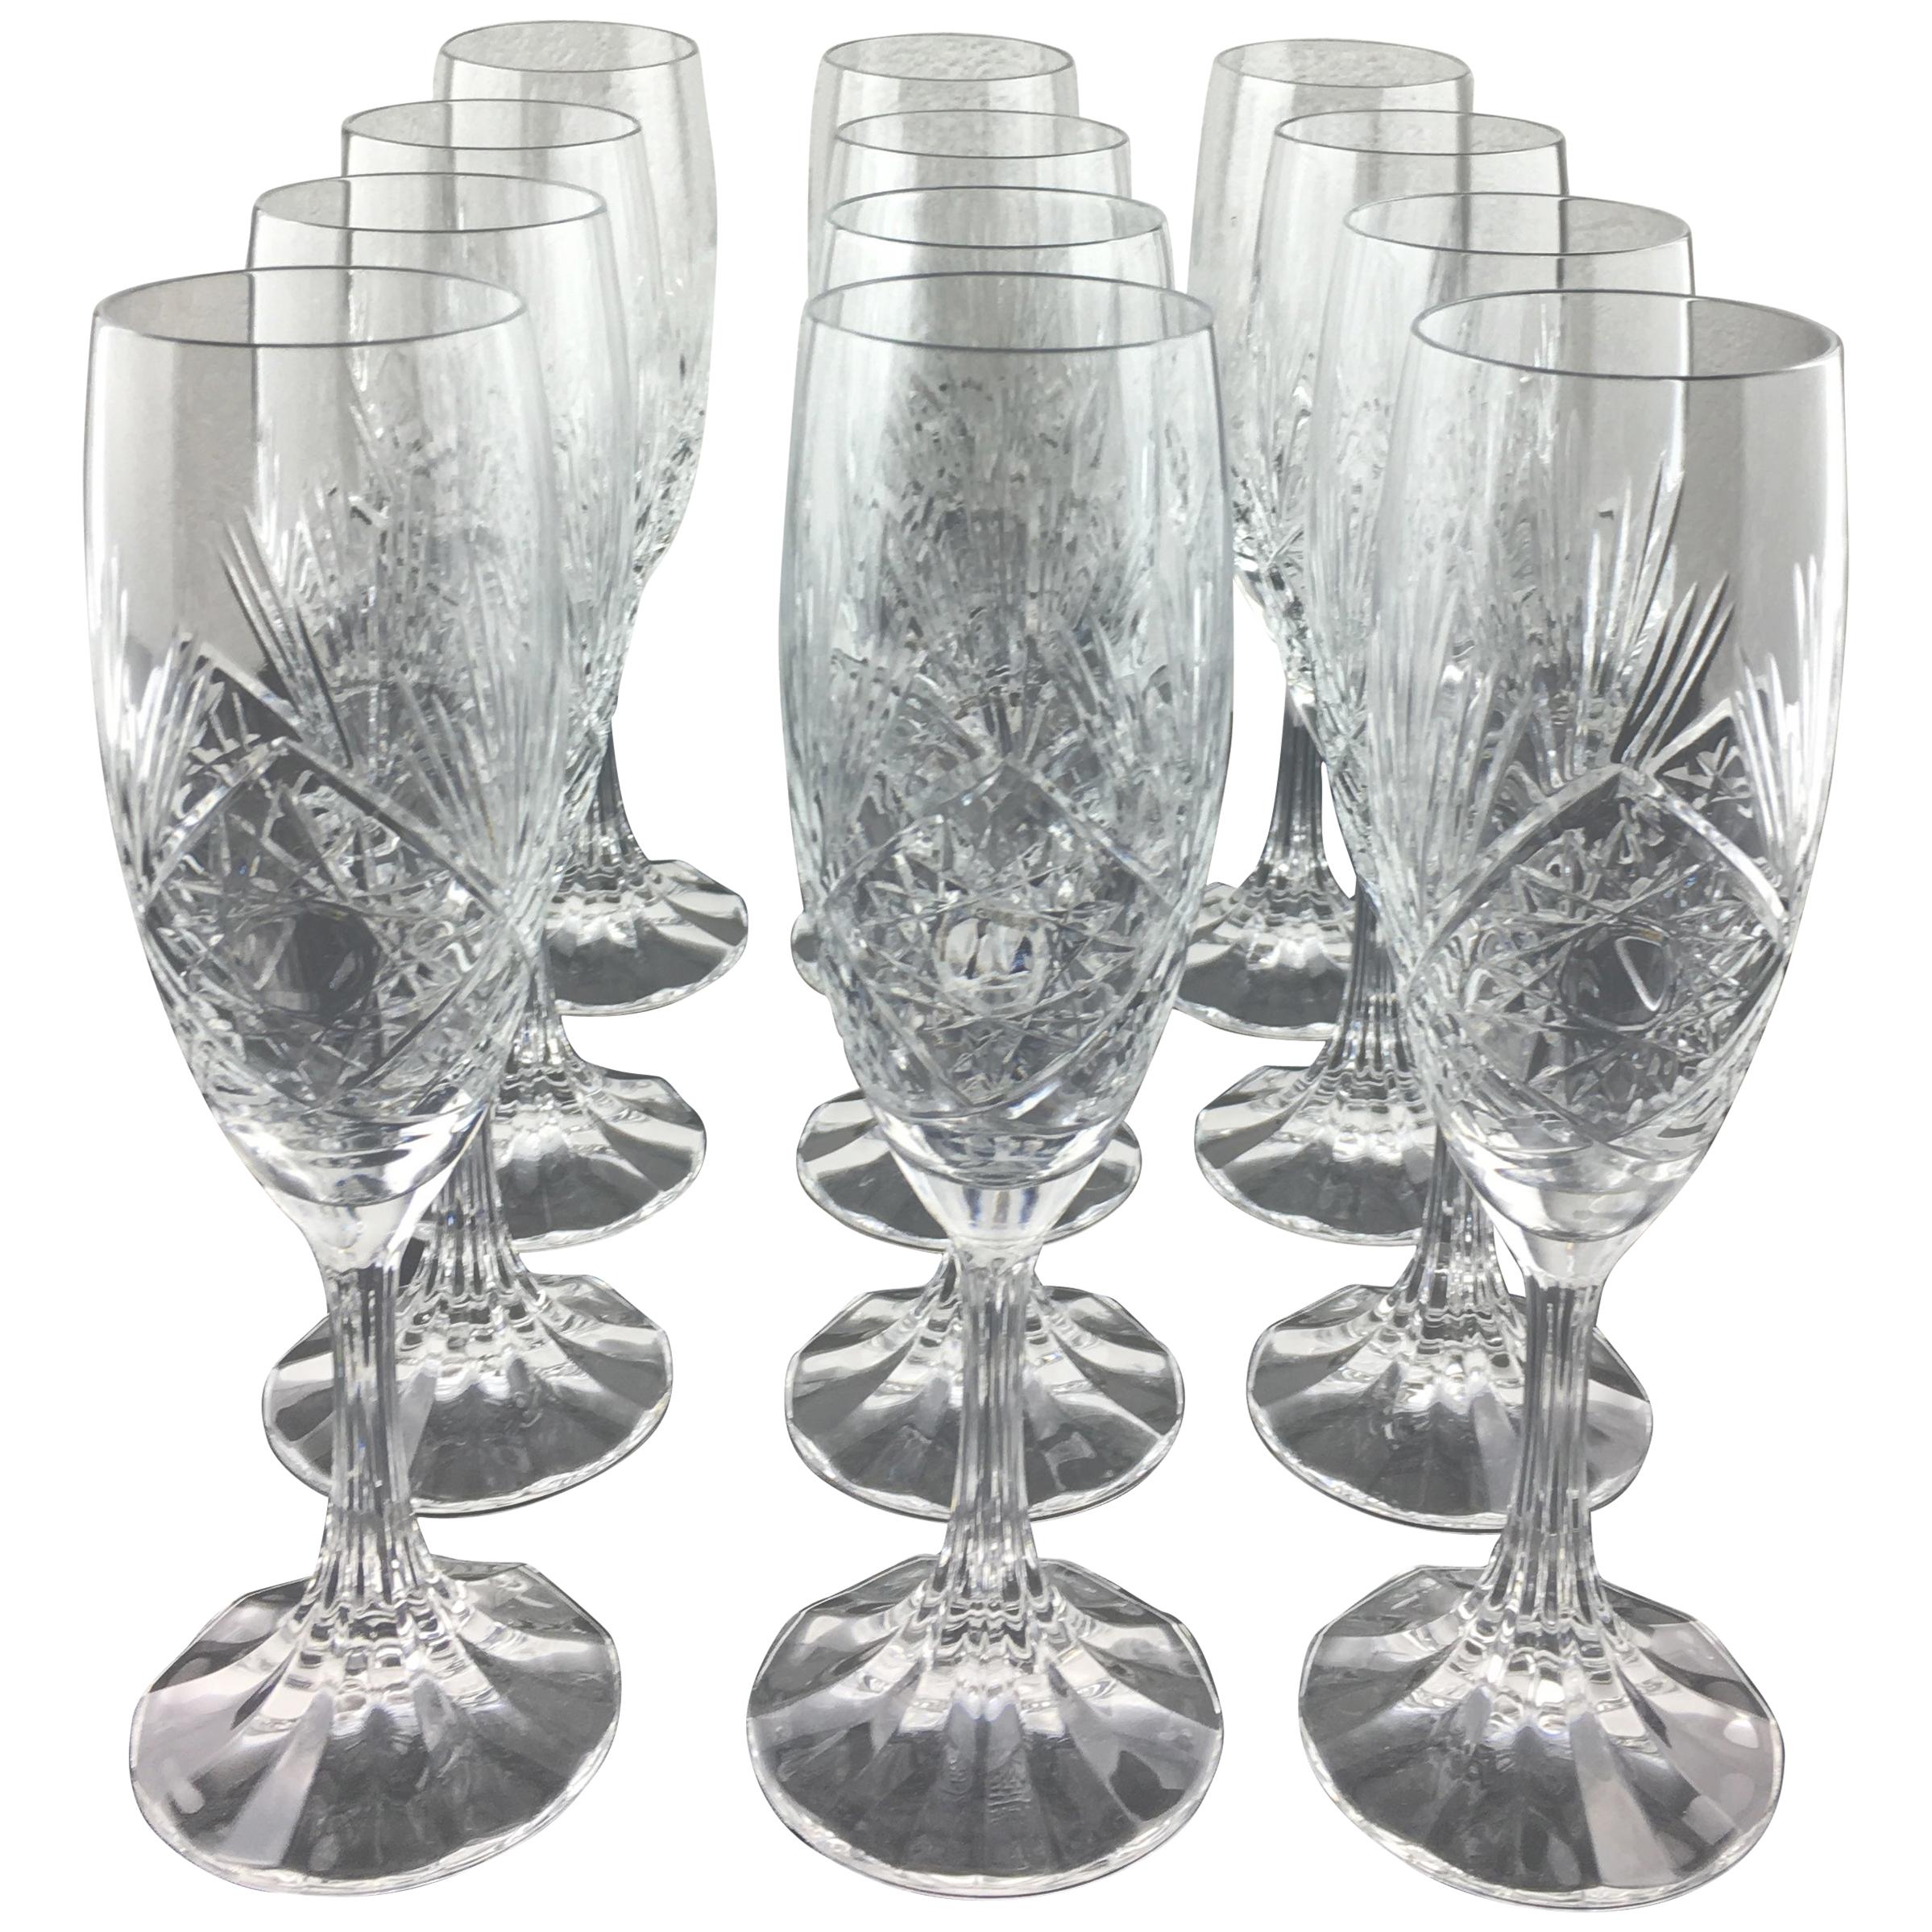 Exquisite 12 Piece Baccarat Crystal Champagne Flutes